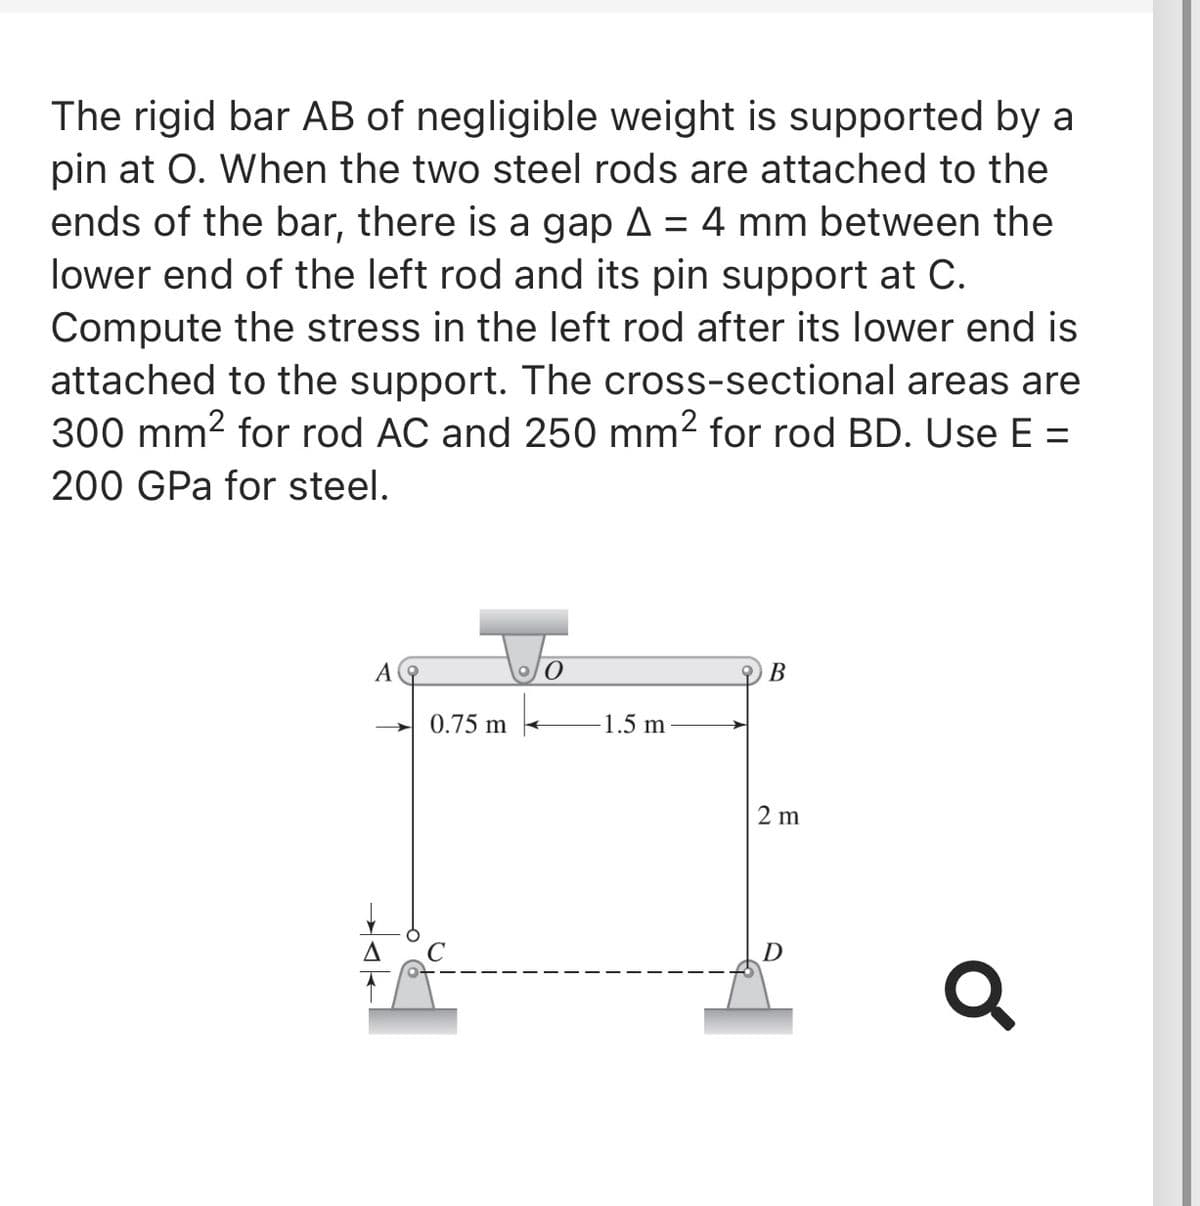 The rigid bar AB of negligible weight is supported by a
pin at O. When the two steel rods are attached to the
ends of the bar, there is a gap A = 4 mm between the
lower end of the left rod and its pin support at C.
%3D
Compute the stress in the left rod after its lower end is
attached to the support. The cross-sectional areas are
300 mm2 for rod AC and 250 mm? for rod BD. Use E =
200 GPa for steel.
A
В
0.75 m
1.5 m
>
2 m
D
